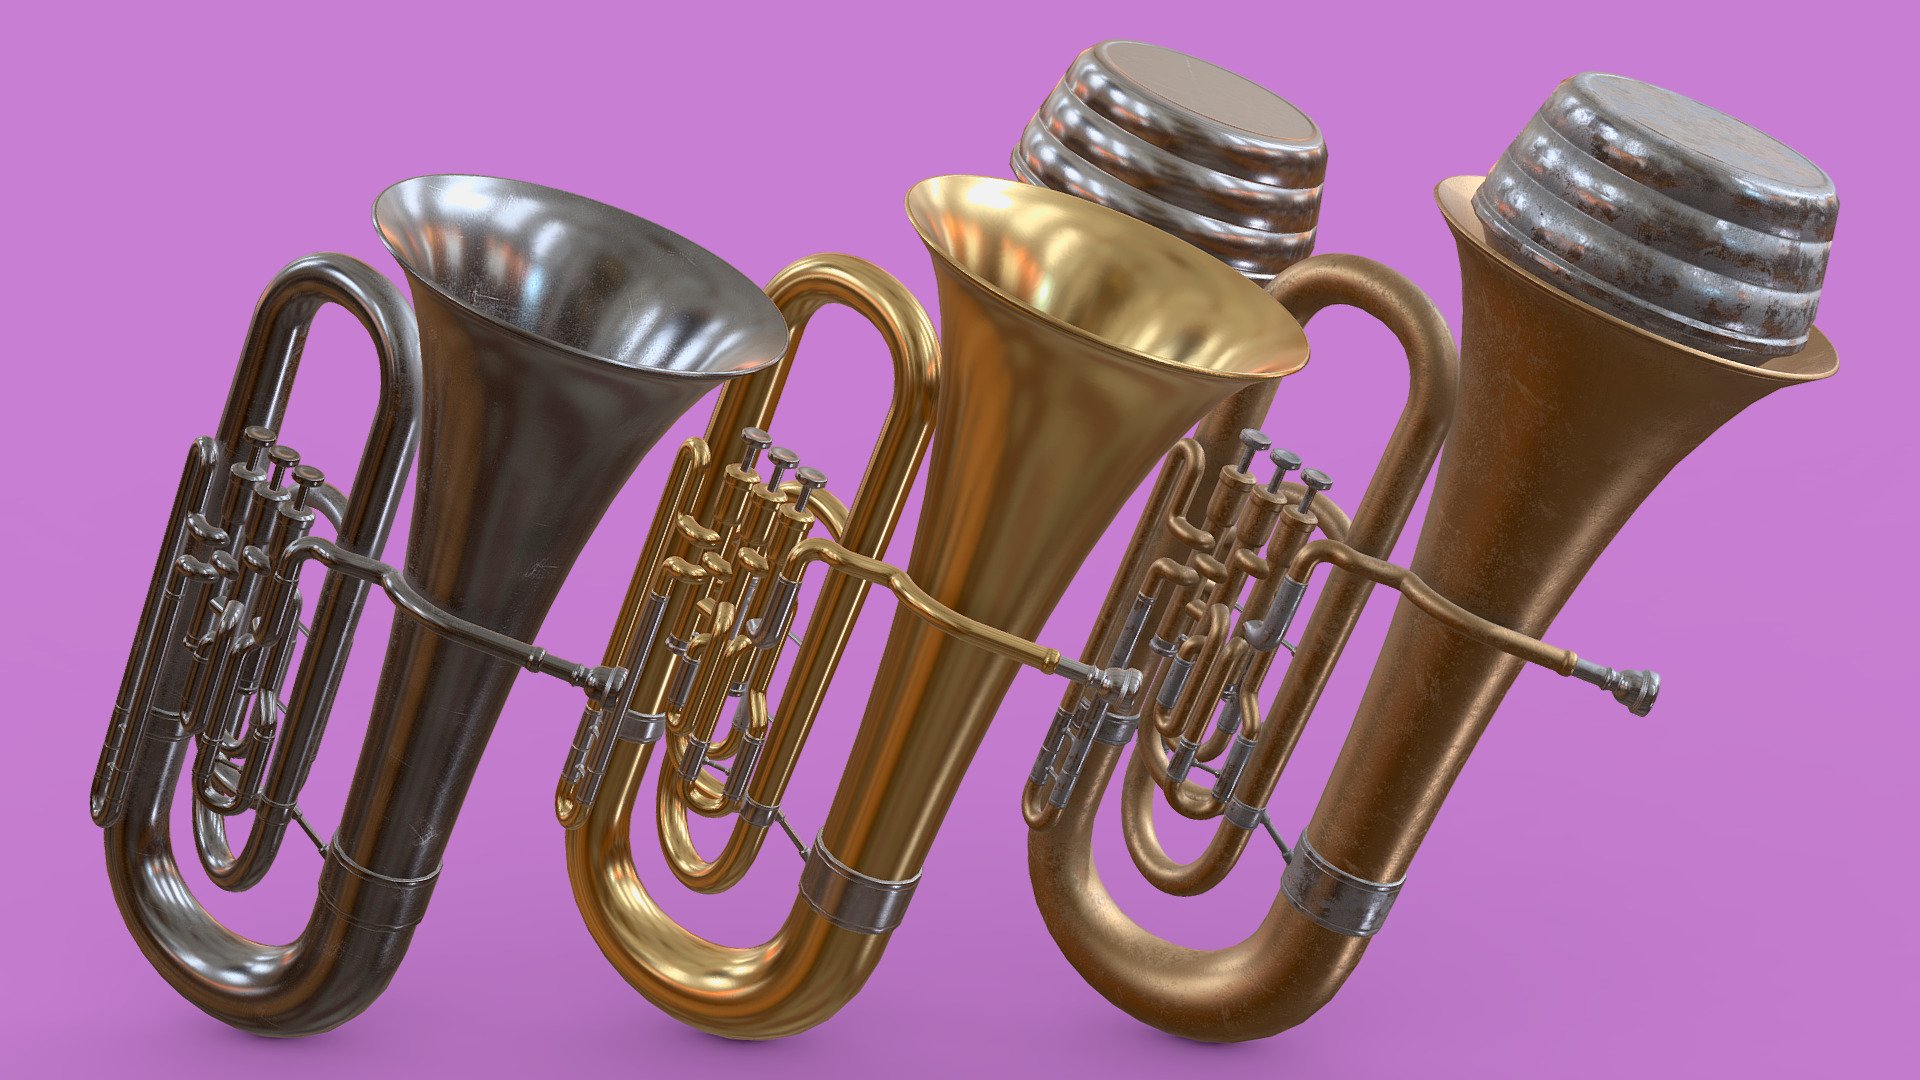 The valves of the tuba are seperate meshes so that they can be animated.

This instrument asset includes a mute as a seperate optional mesh.



There are three separate texture sets available in the additional files:

- A mint condition brass variant

- A silver variant with accumulated dust

- A dull variant with wear and tear



All three texture sets are packed and ready for import into Unreal and Unity with proper texture settings. An unpacked roughness metallic set is included as well for generic work. For further customization, I've included the baked mesh maps that were generated from the high poly from Substance Painter. While the textures from the Sketchfab viewport are 2048 by 2048, the textures from the additional files are 4096 by 4096 3d model